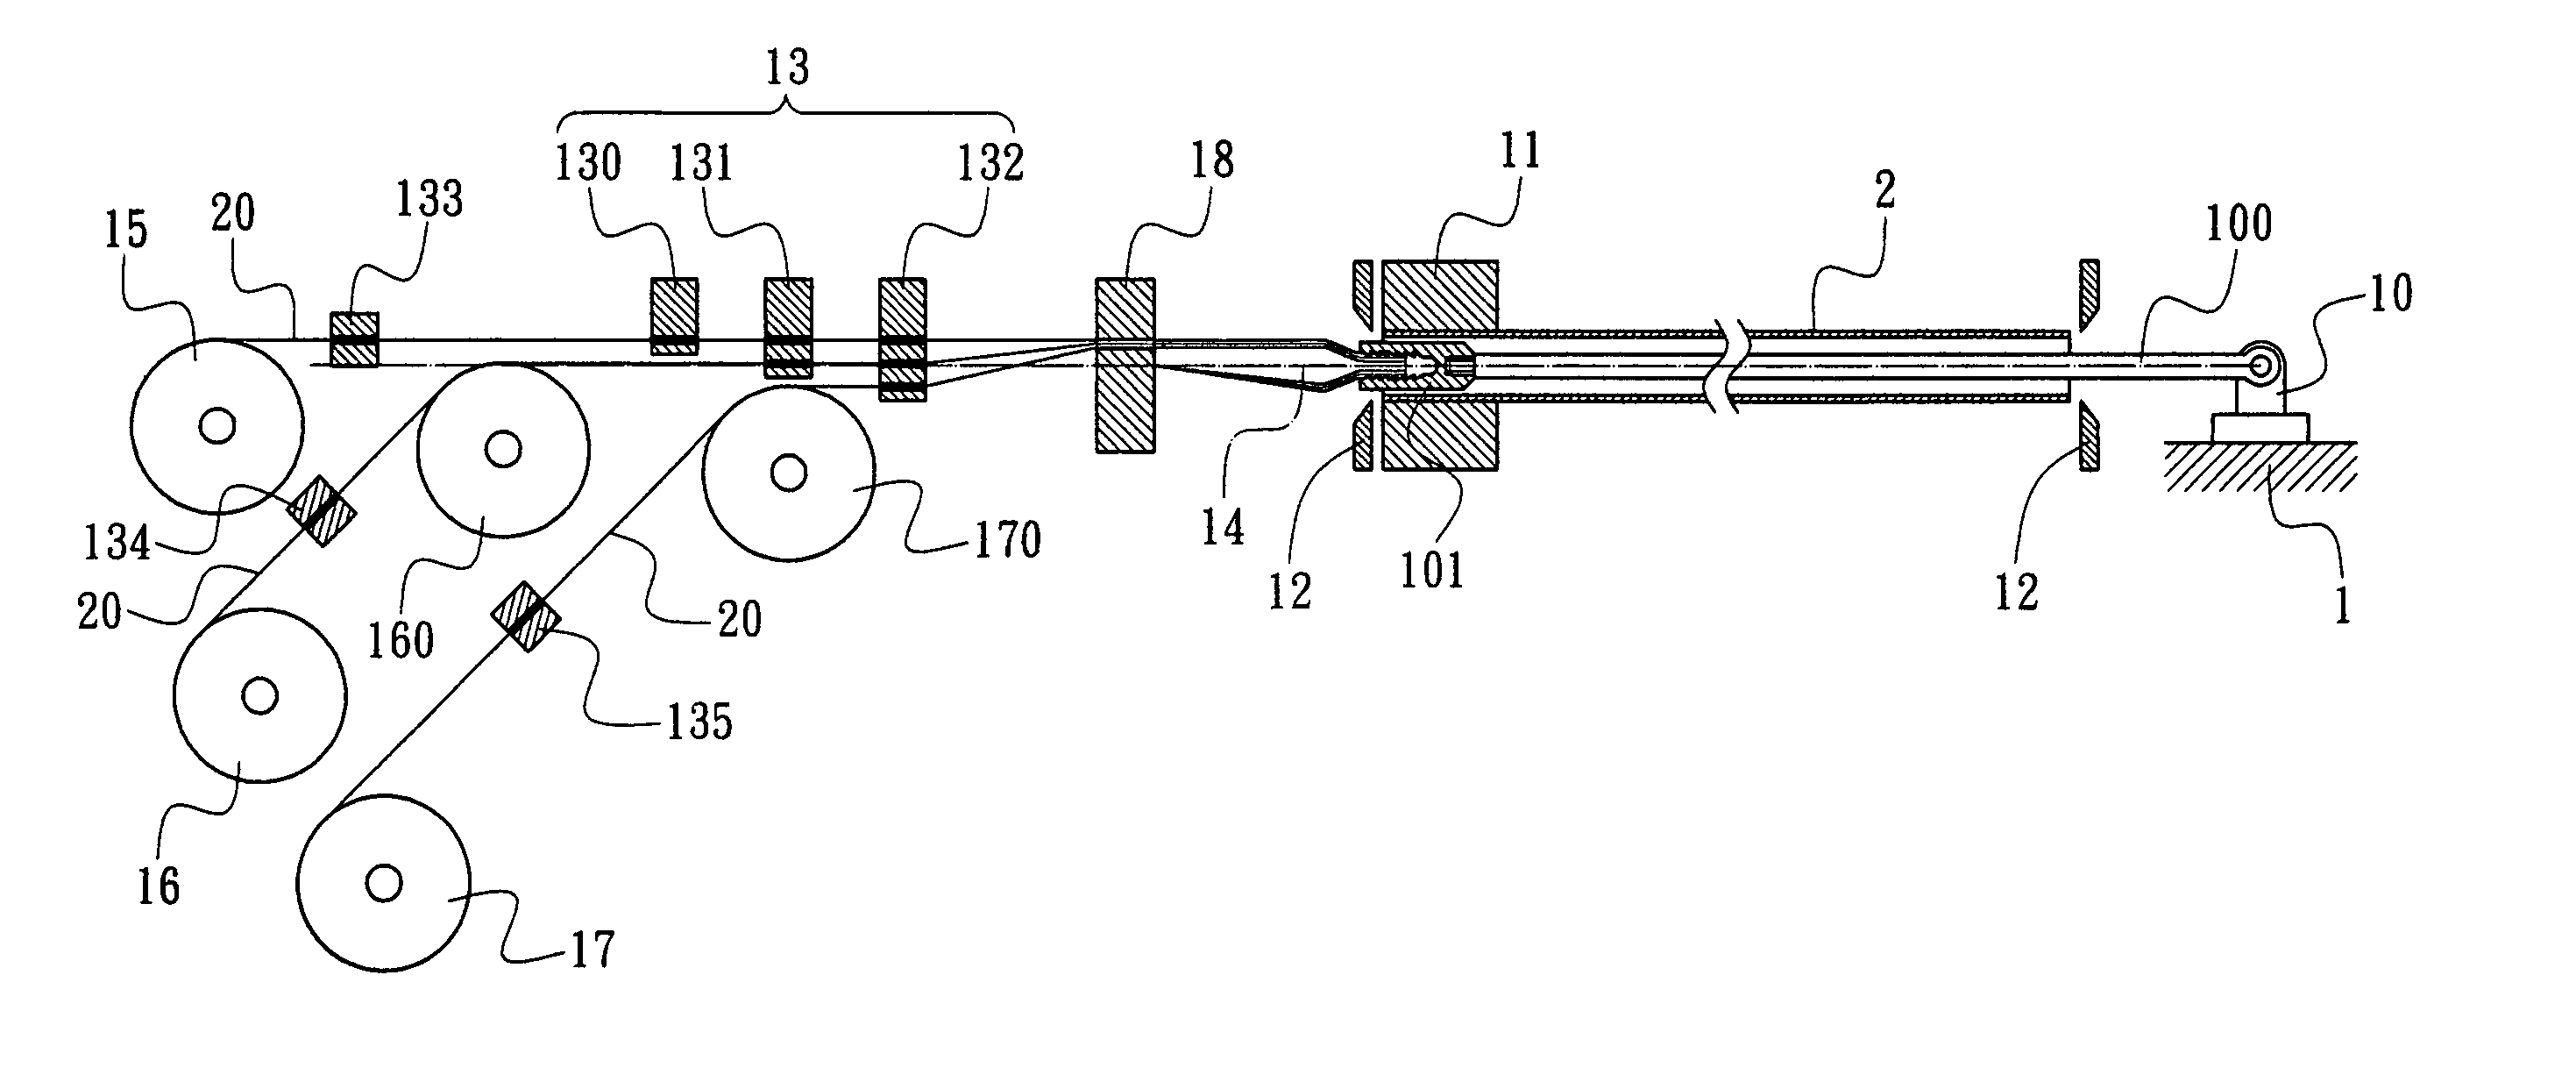 Apparatus for disposing capillary structure into heat pipe